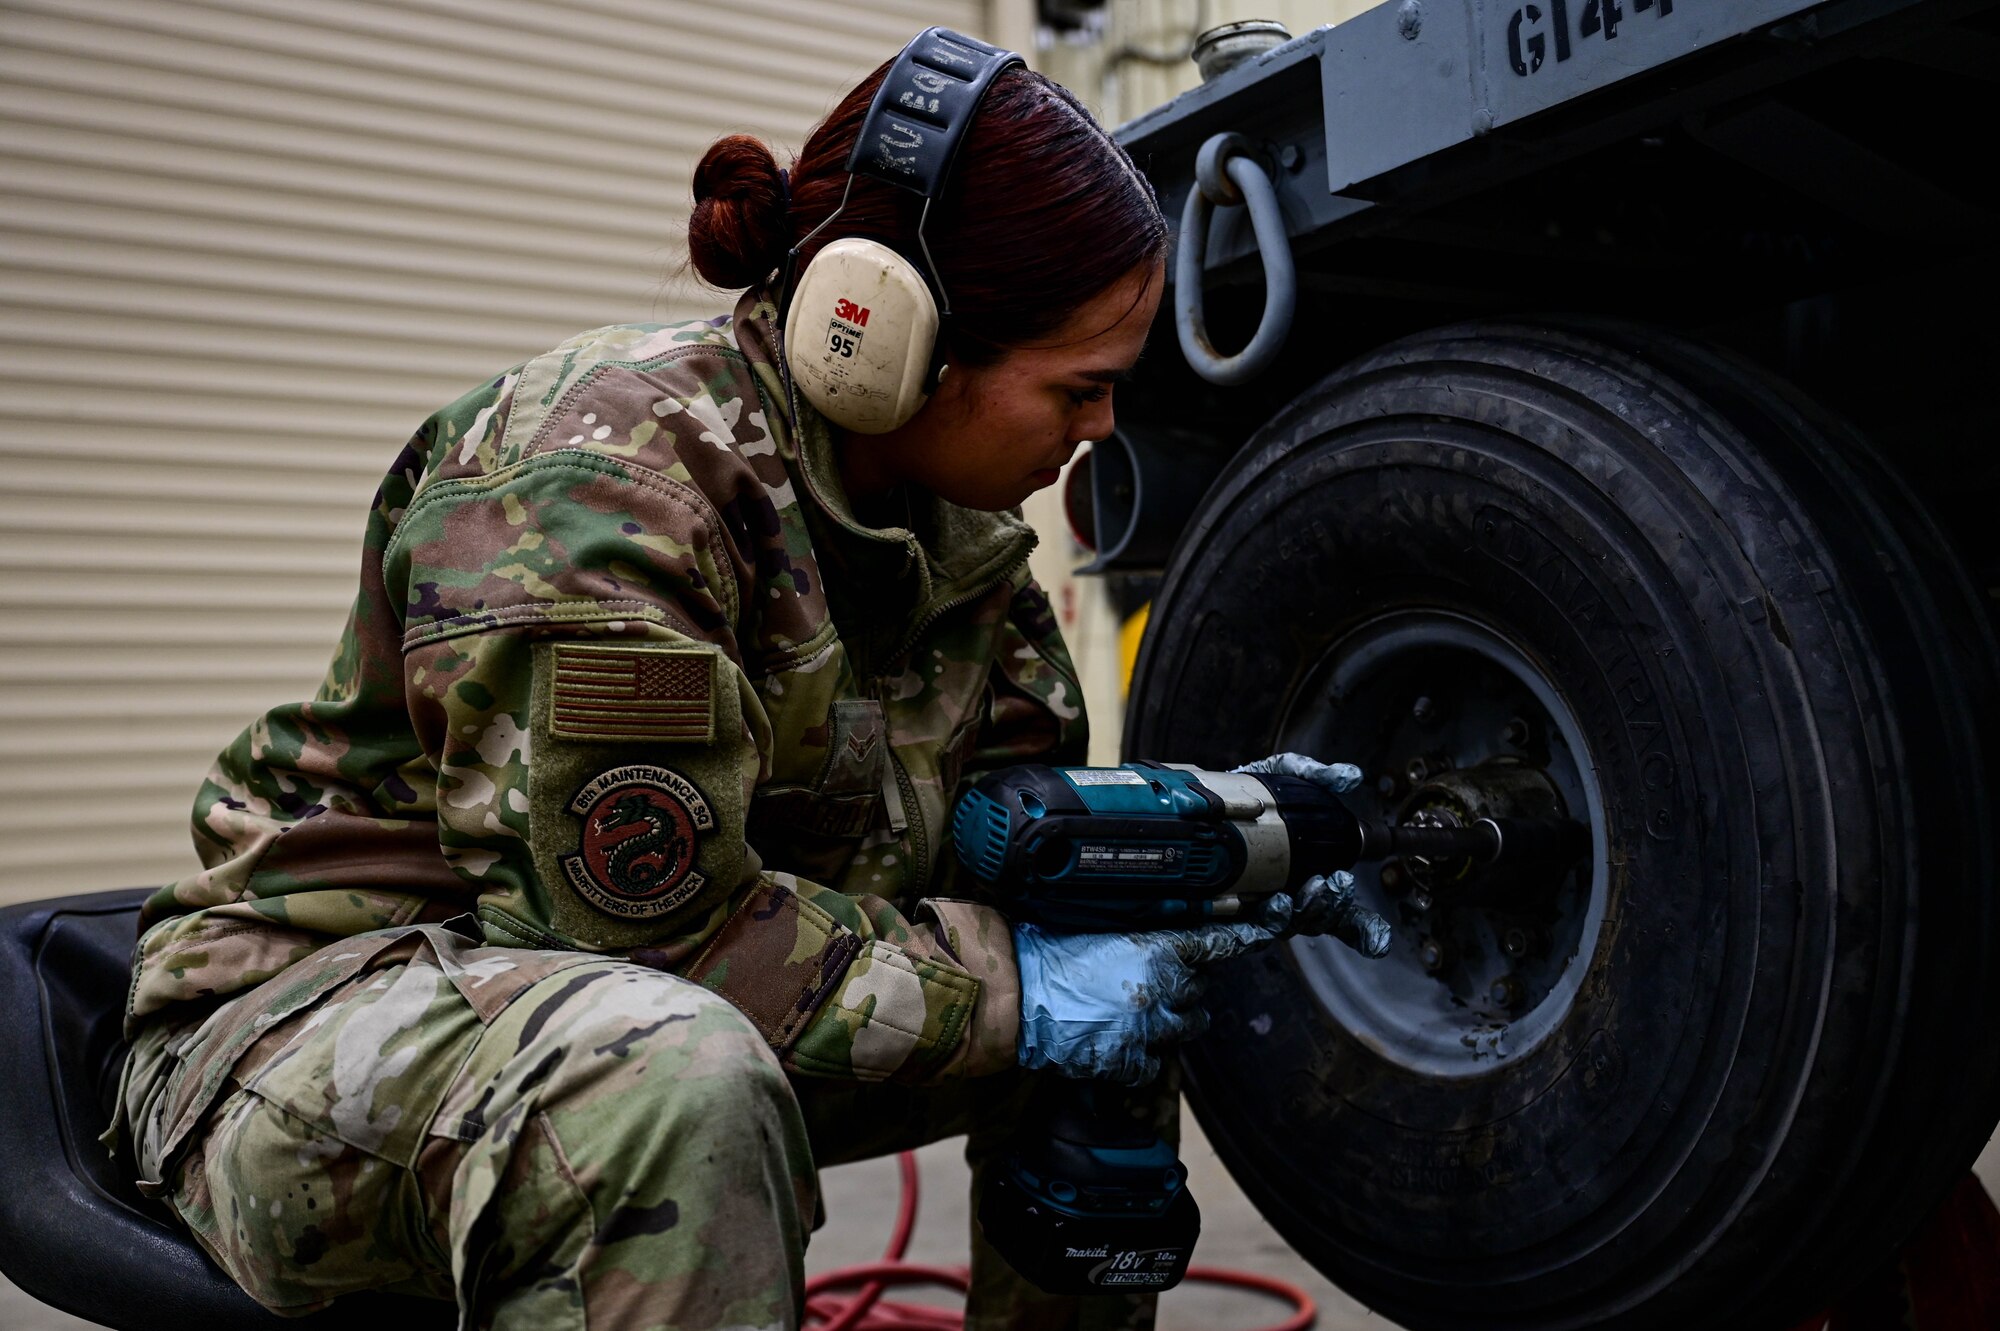 Airman 1st Class Tyra Rosario Diaz, 8th Maintenance Squadron munitions systems equipment maintenance technician, uses an impact wrench to attach lug nuts to a munitions trailer at Kunsan Air Base, Republic of Korea, Mar 15, 2023.